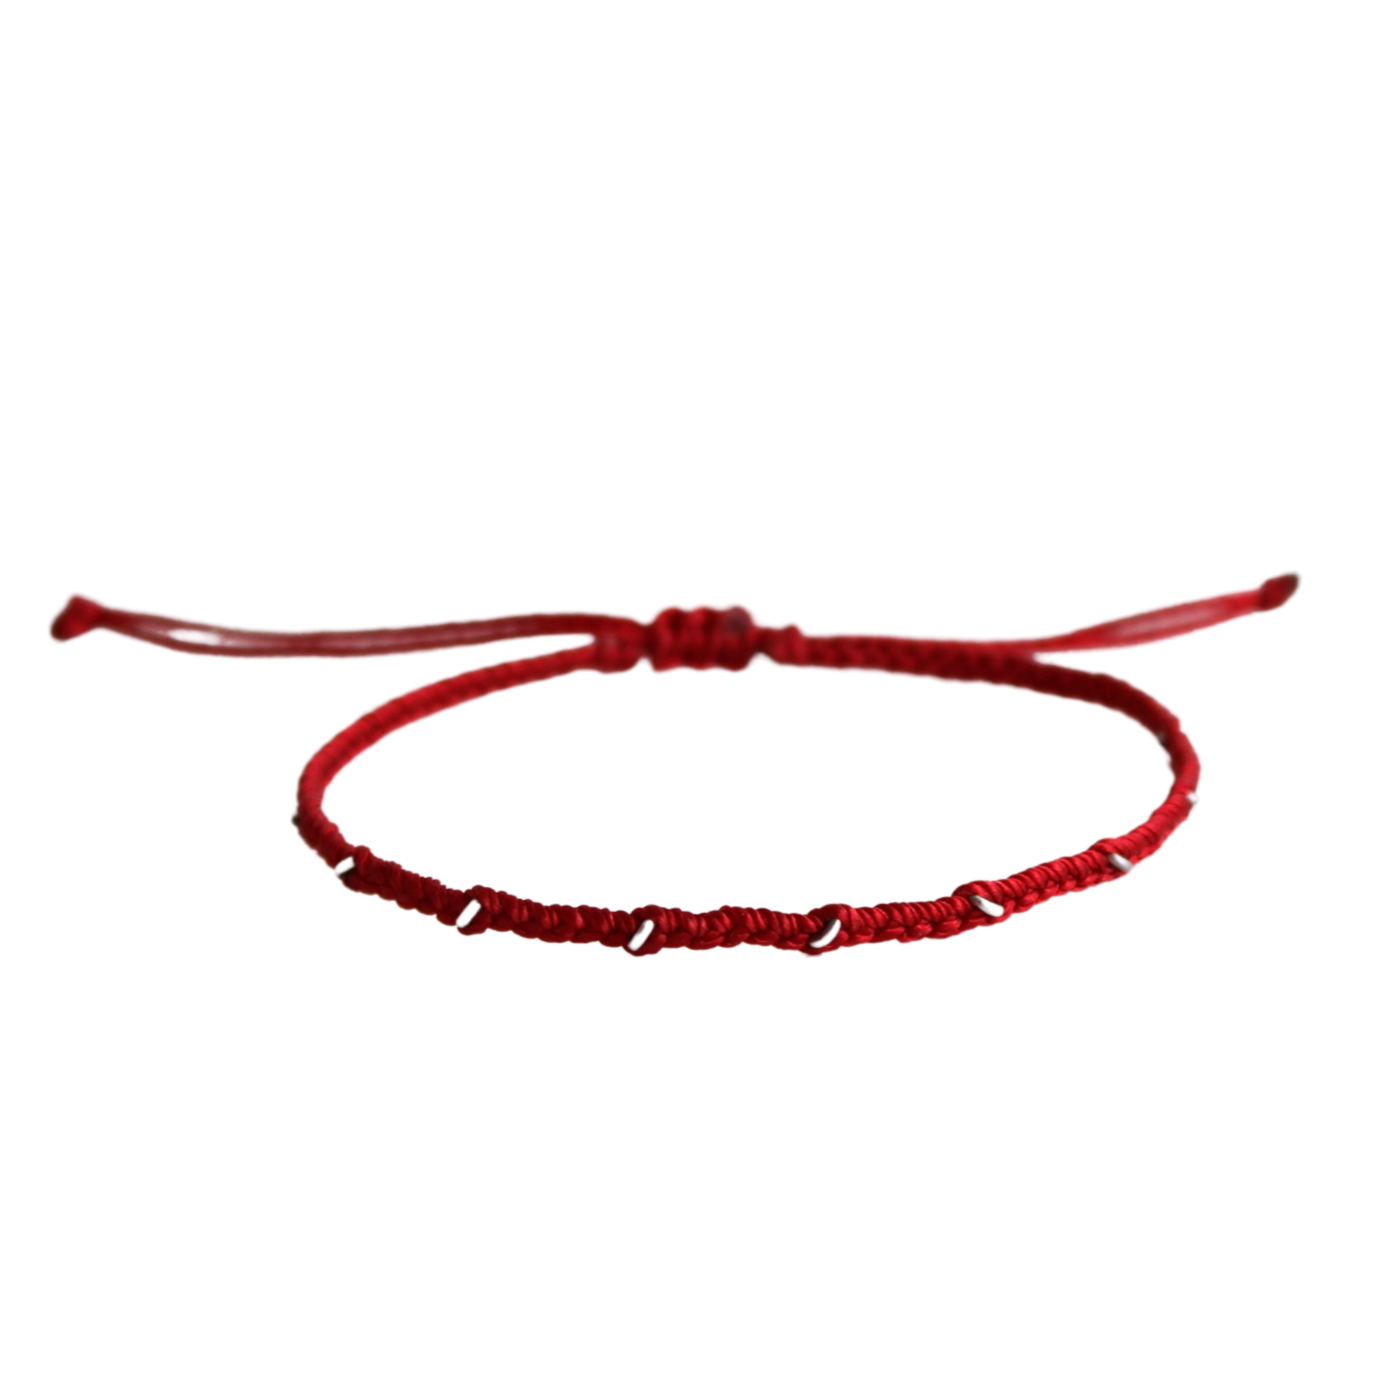 Red Macrame Bracelet with Silver Rings